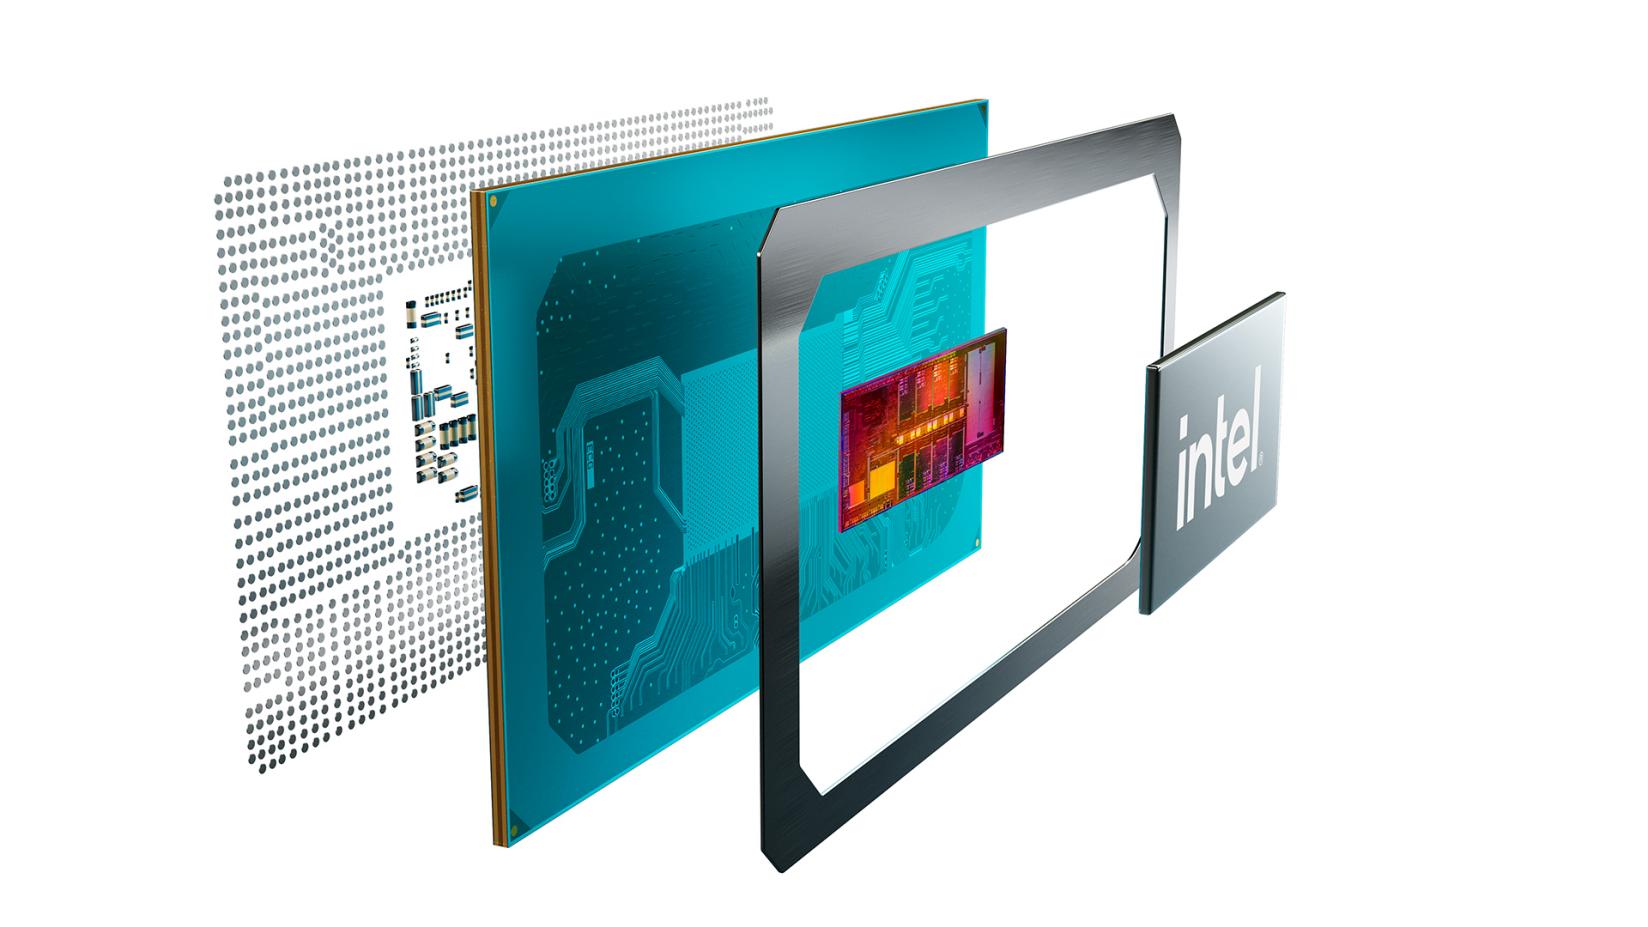 tgl h45 xploded 16 v01.jpg.rendition.intel.web.1648.927 Intel Officially Launches Tiger Lake-H Mobile Processors Worldwide, Pumps 1 Million Chips into the Market